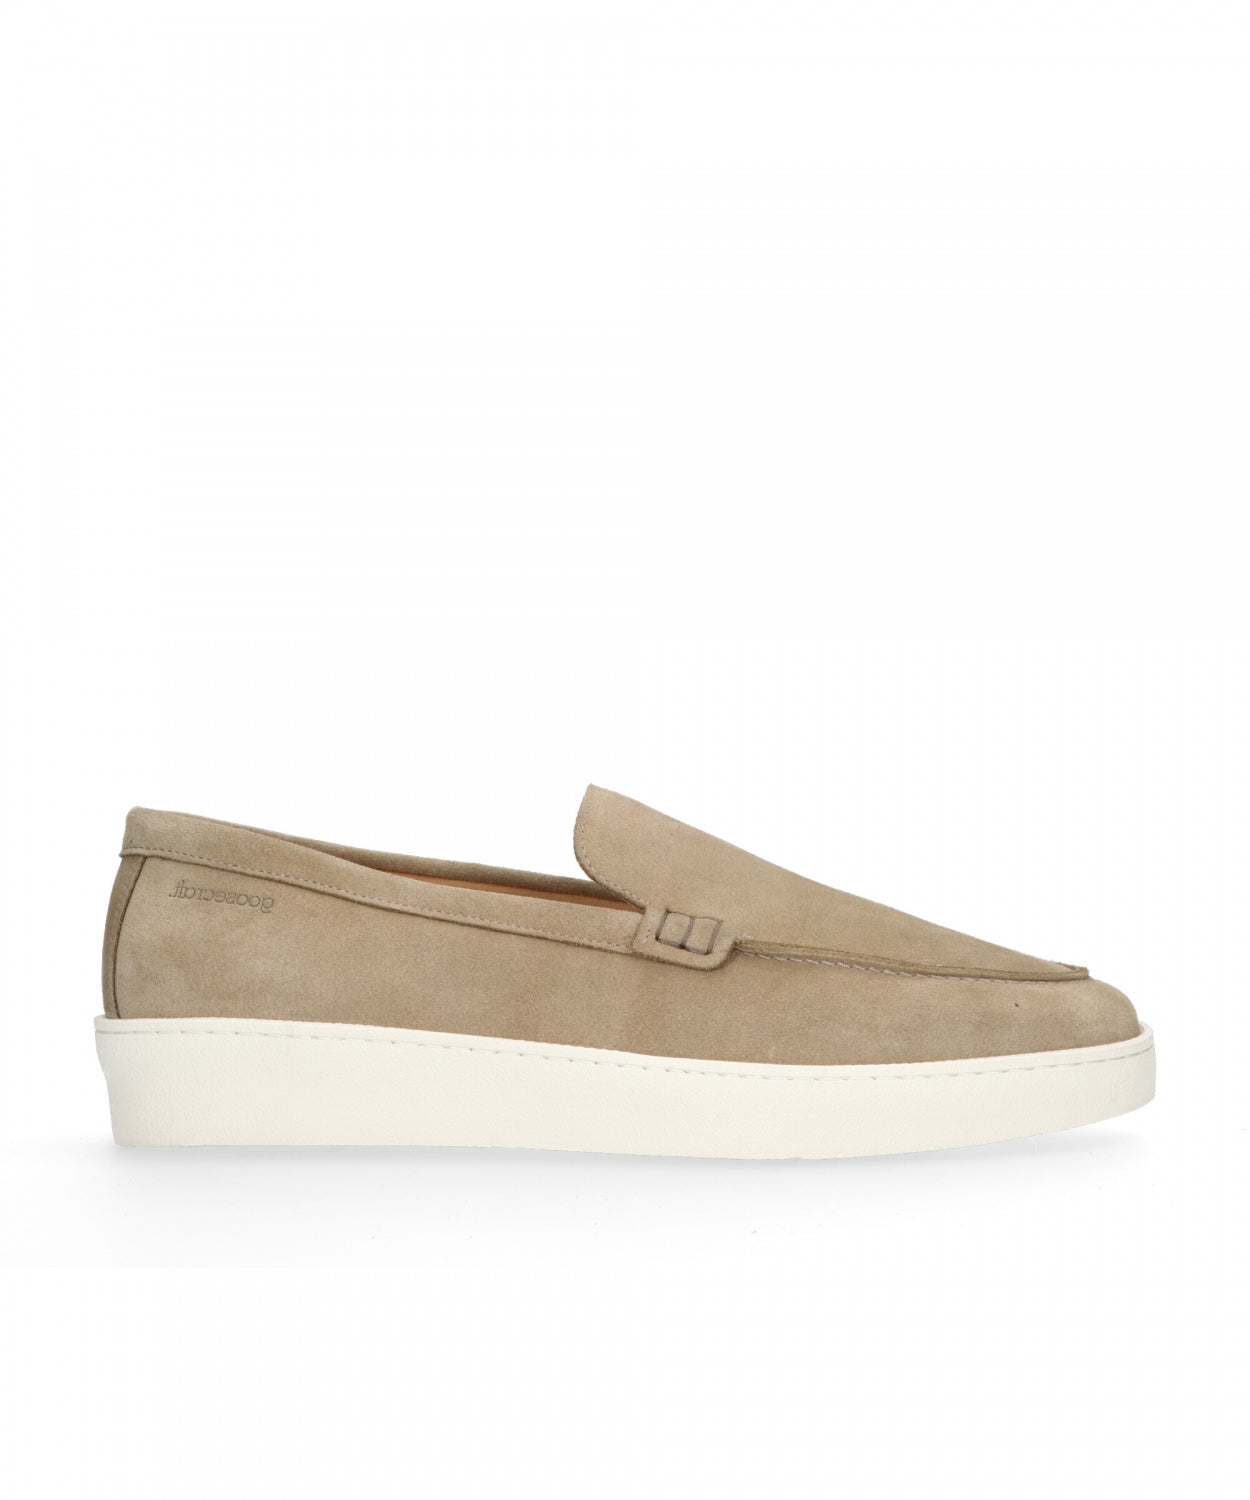 Bean 1-a beige suede loafer - white sole